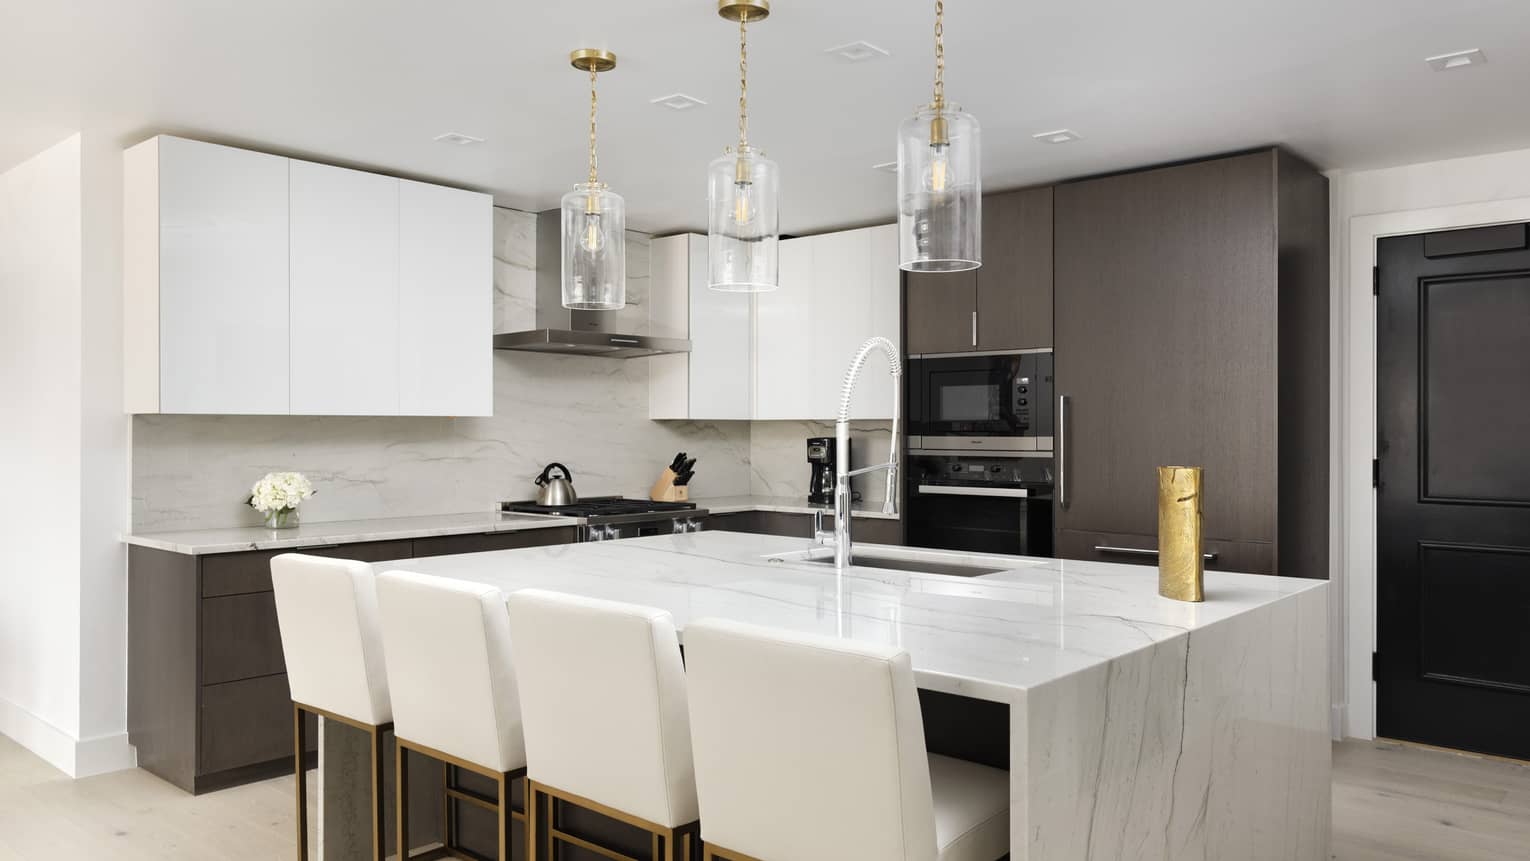 Kitchen with white marble island, four white counter-height chairs, three glass pendant lights